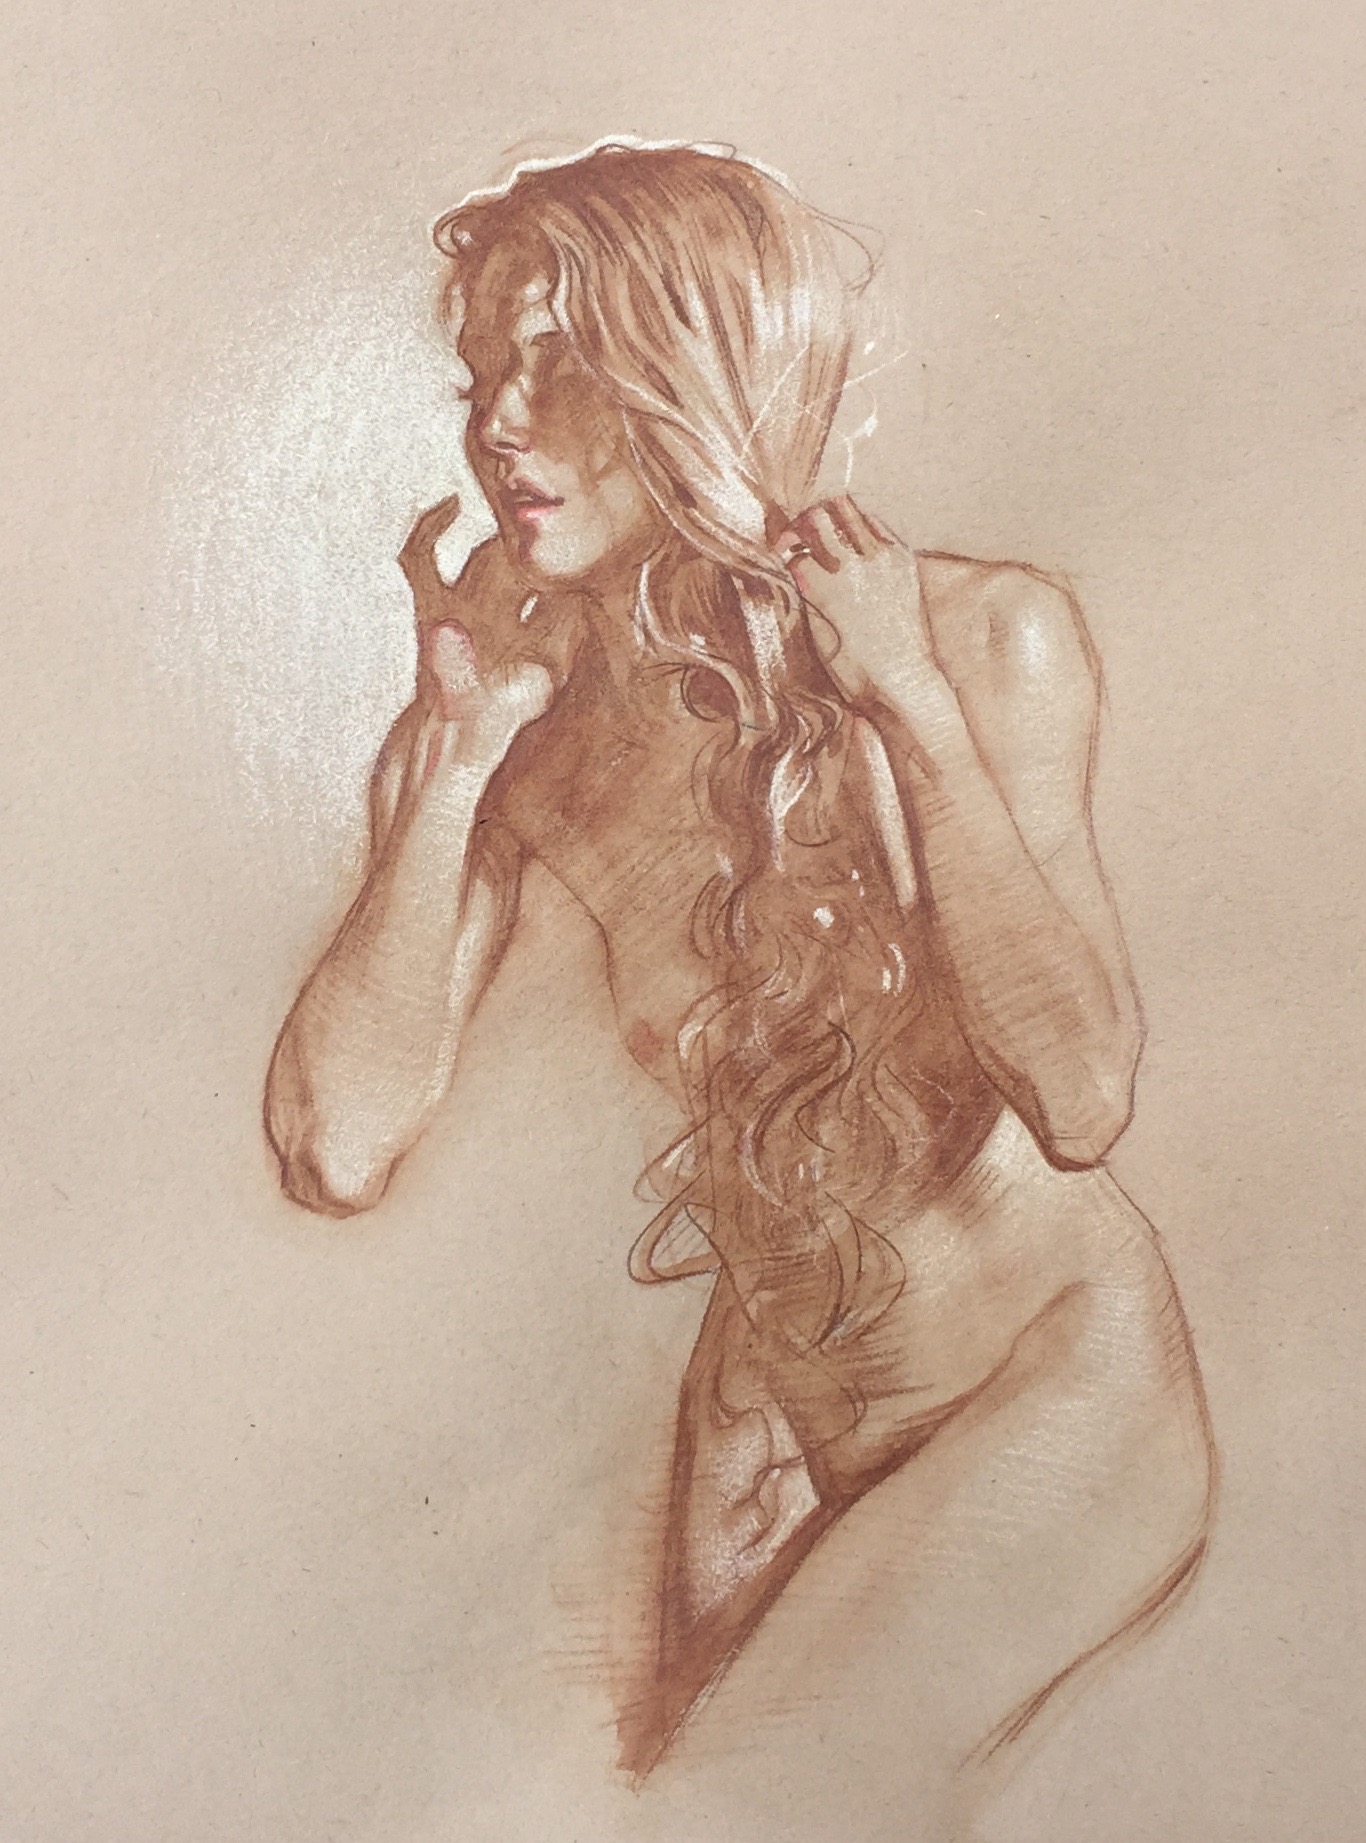 James Martin played around with lost and found edges in this life drawing